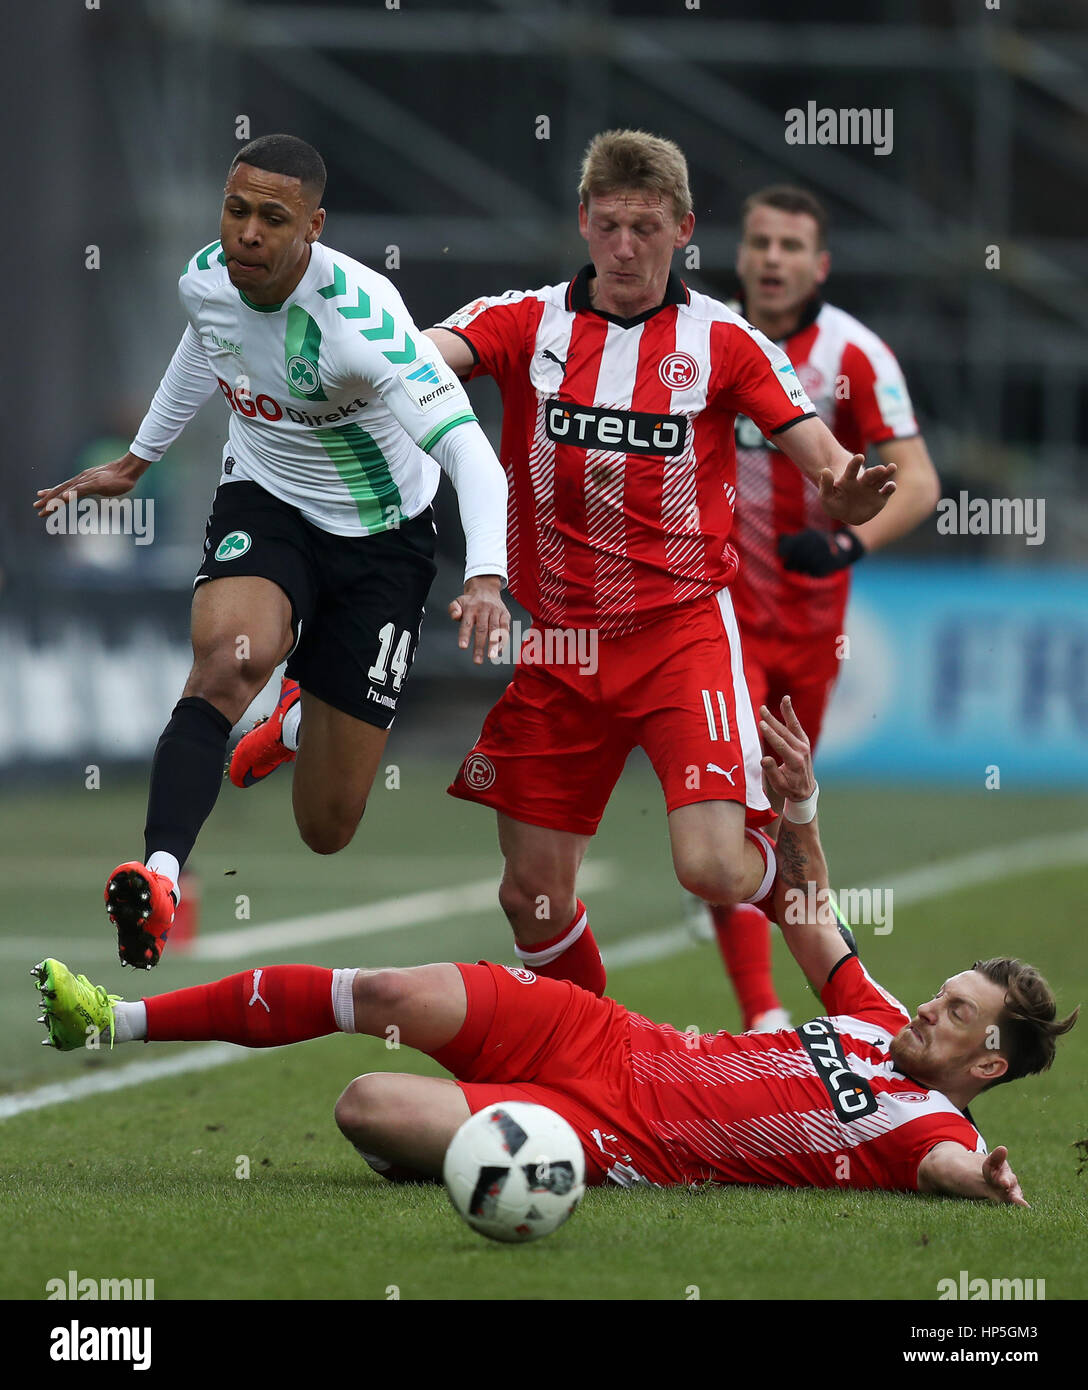 Fuerth, Germany. 18th Feb, 2017. Fuerth's Mathis Bolly (L) in action against Duesseldorf's Adam Bodzek (bottom) and Axel Bellinghausen (C) during the German second division Bundesliga soccer match between SpVgg Greuther Fürth and Fortuna Duesseldorf at Sportpark Ronhof Thomas Sommer in Fuerth, Germany, 18 February 2017. (EMBARGO CONDITIONS - ATTENTION: Due to the accreditation guidelines, the DFL only permits the publication and utilisation of up to 15 pictures per match on the internet and in online media during the match.) Photo: Daniel Karmann/dpa/Alamy Live News Stock Photo